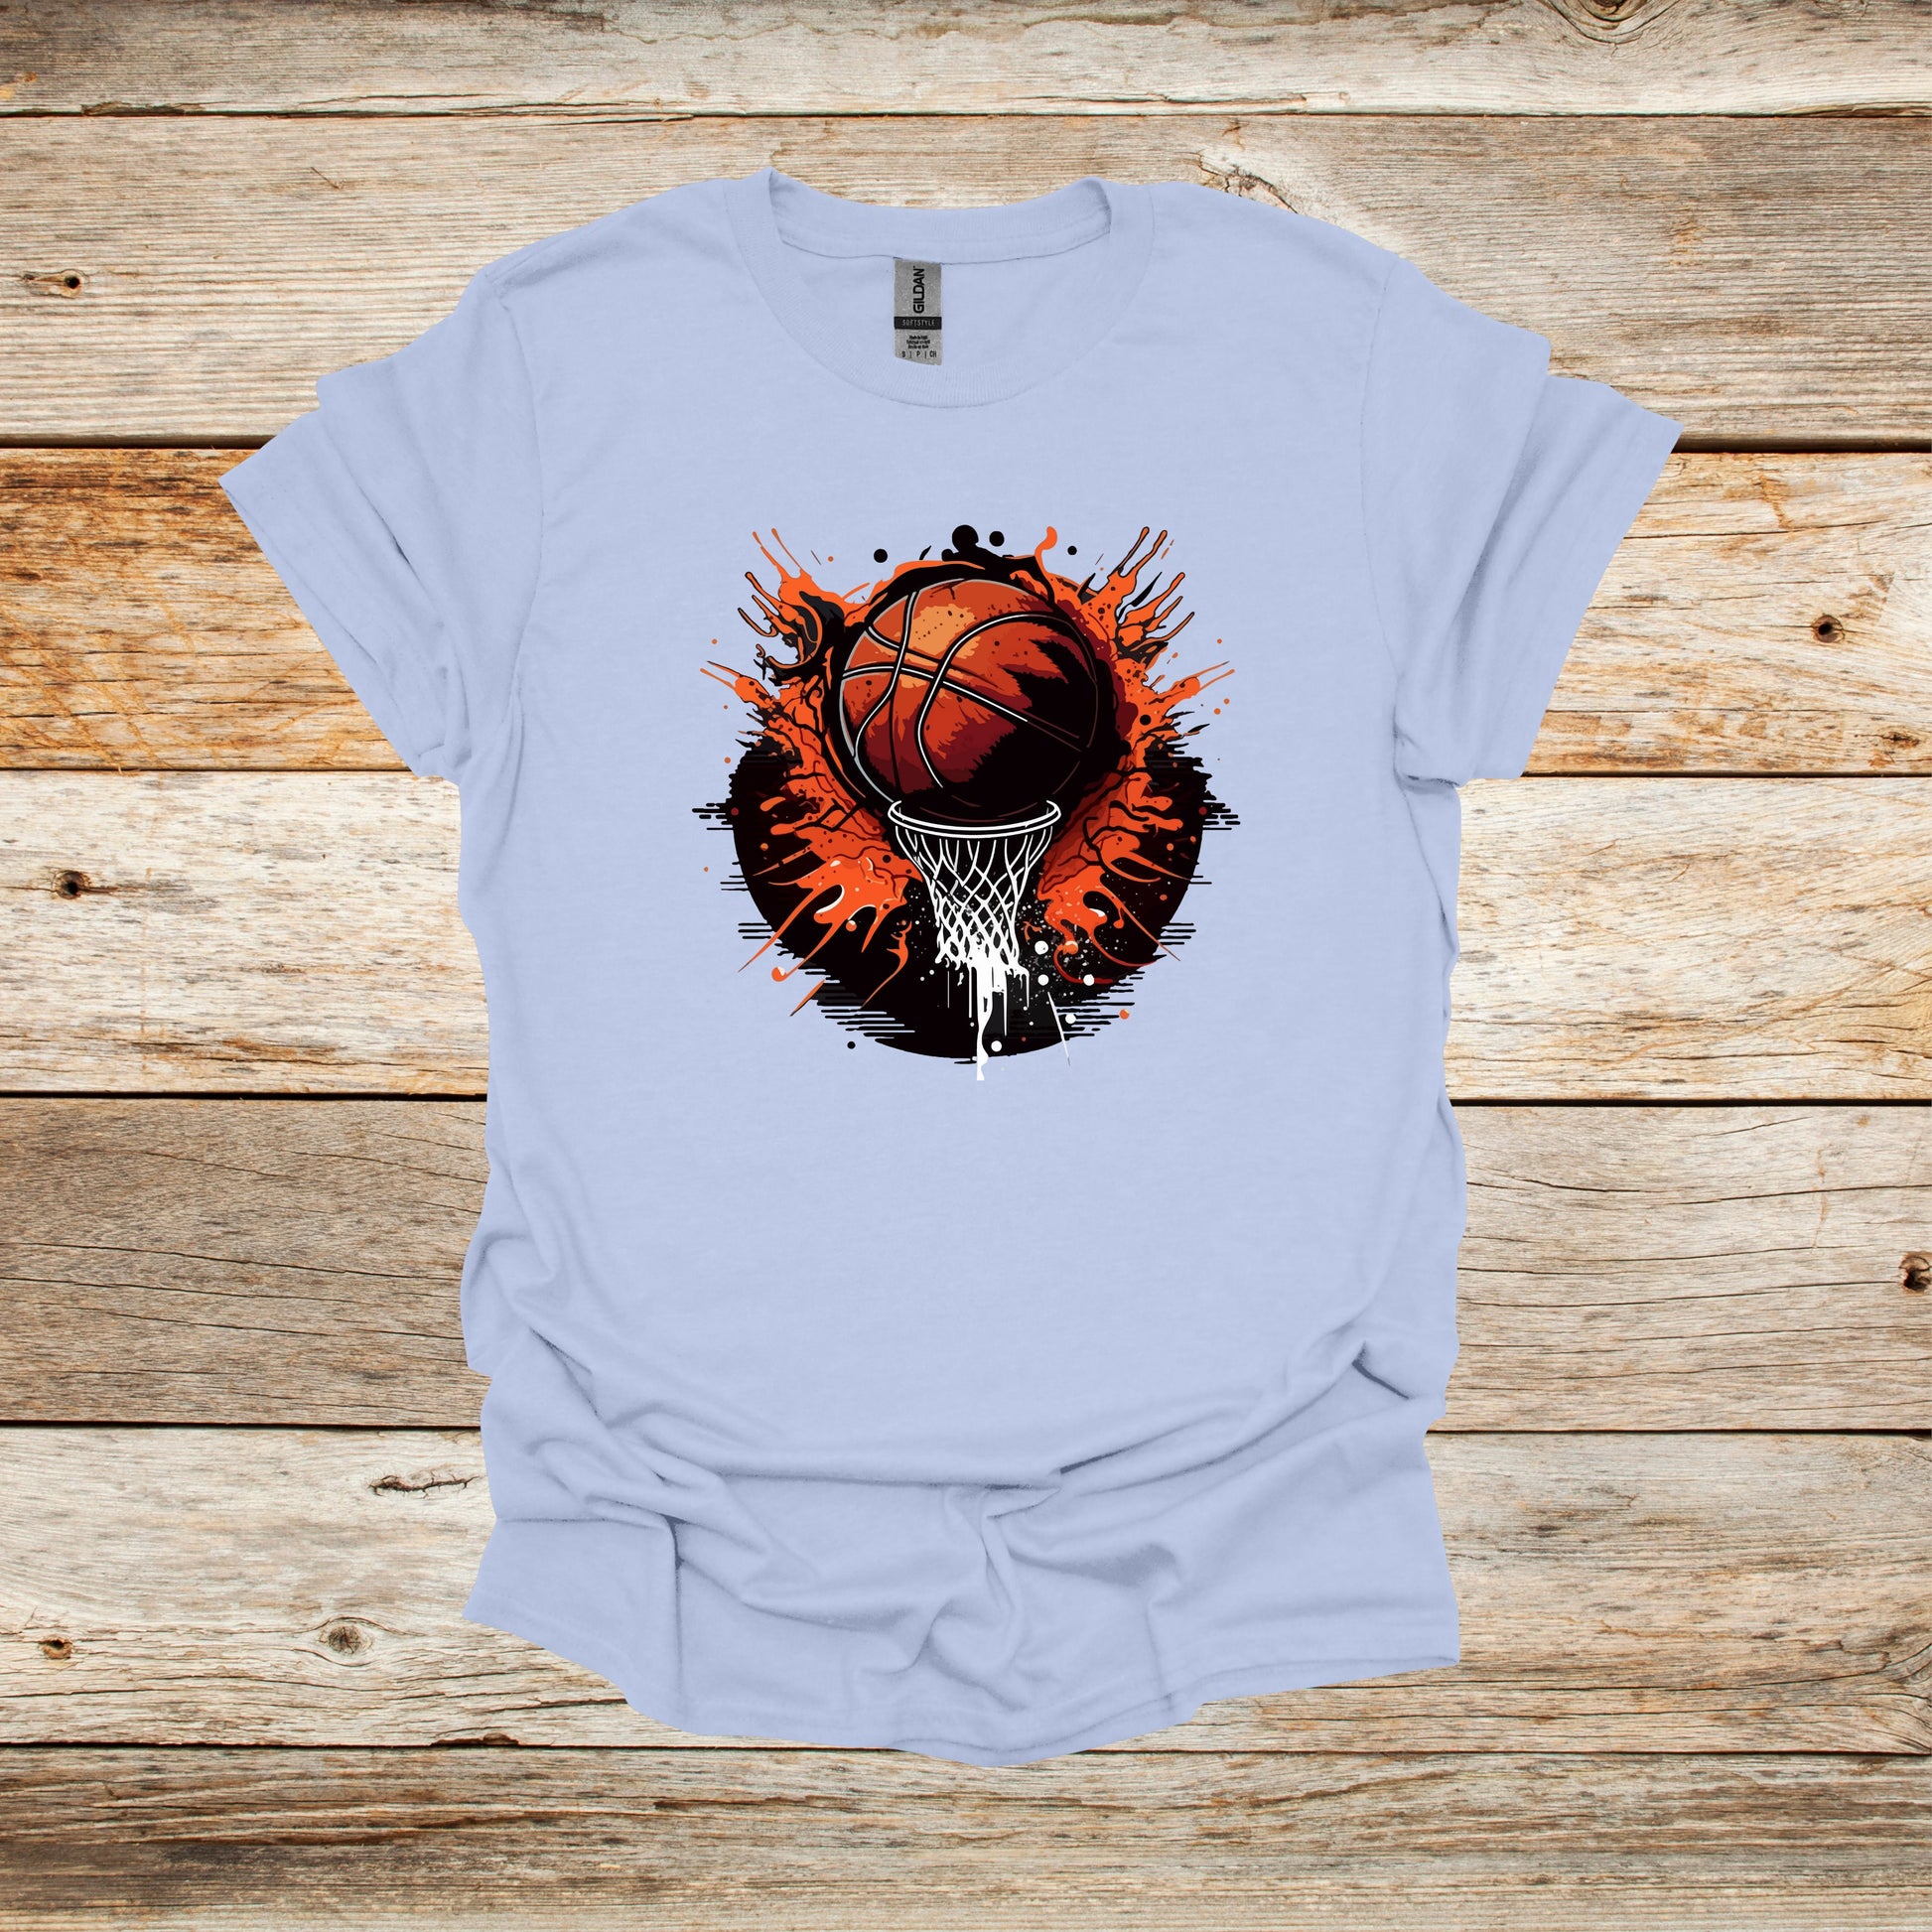 Basketball T-Shirt - Adult and Children's Tee Shirts - Sports T-Shirts Graphic Avenue Light Blue Adult Small 